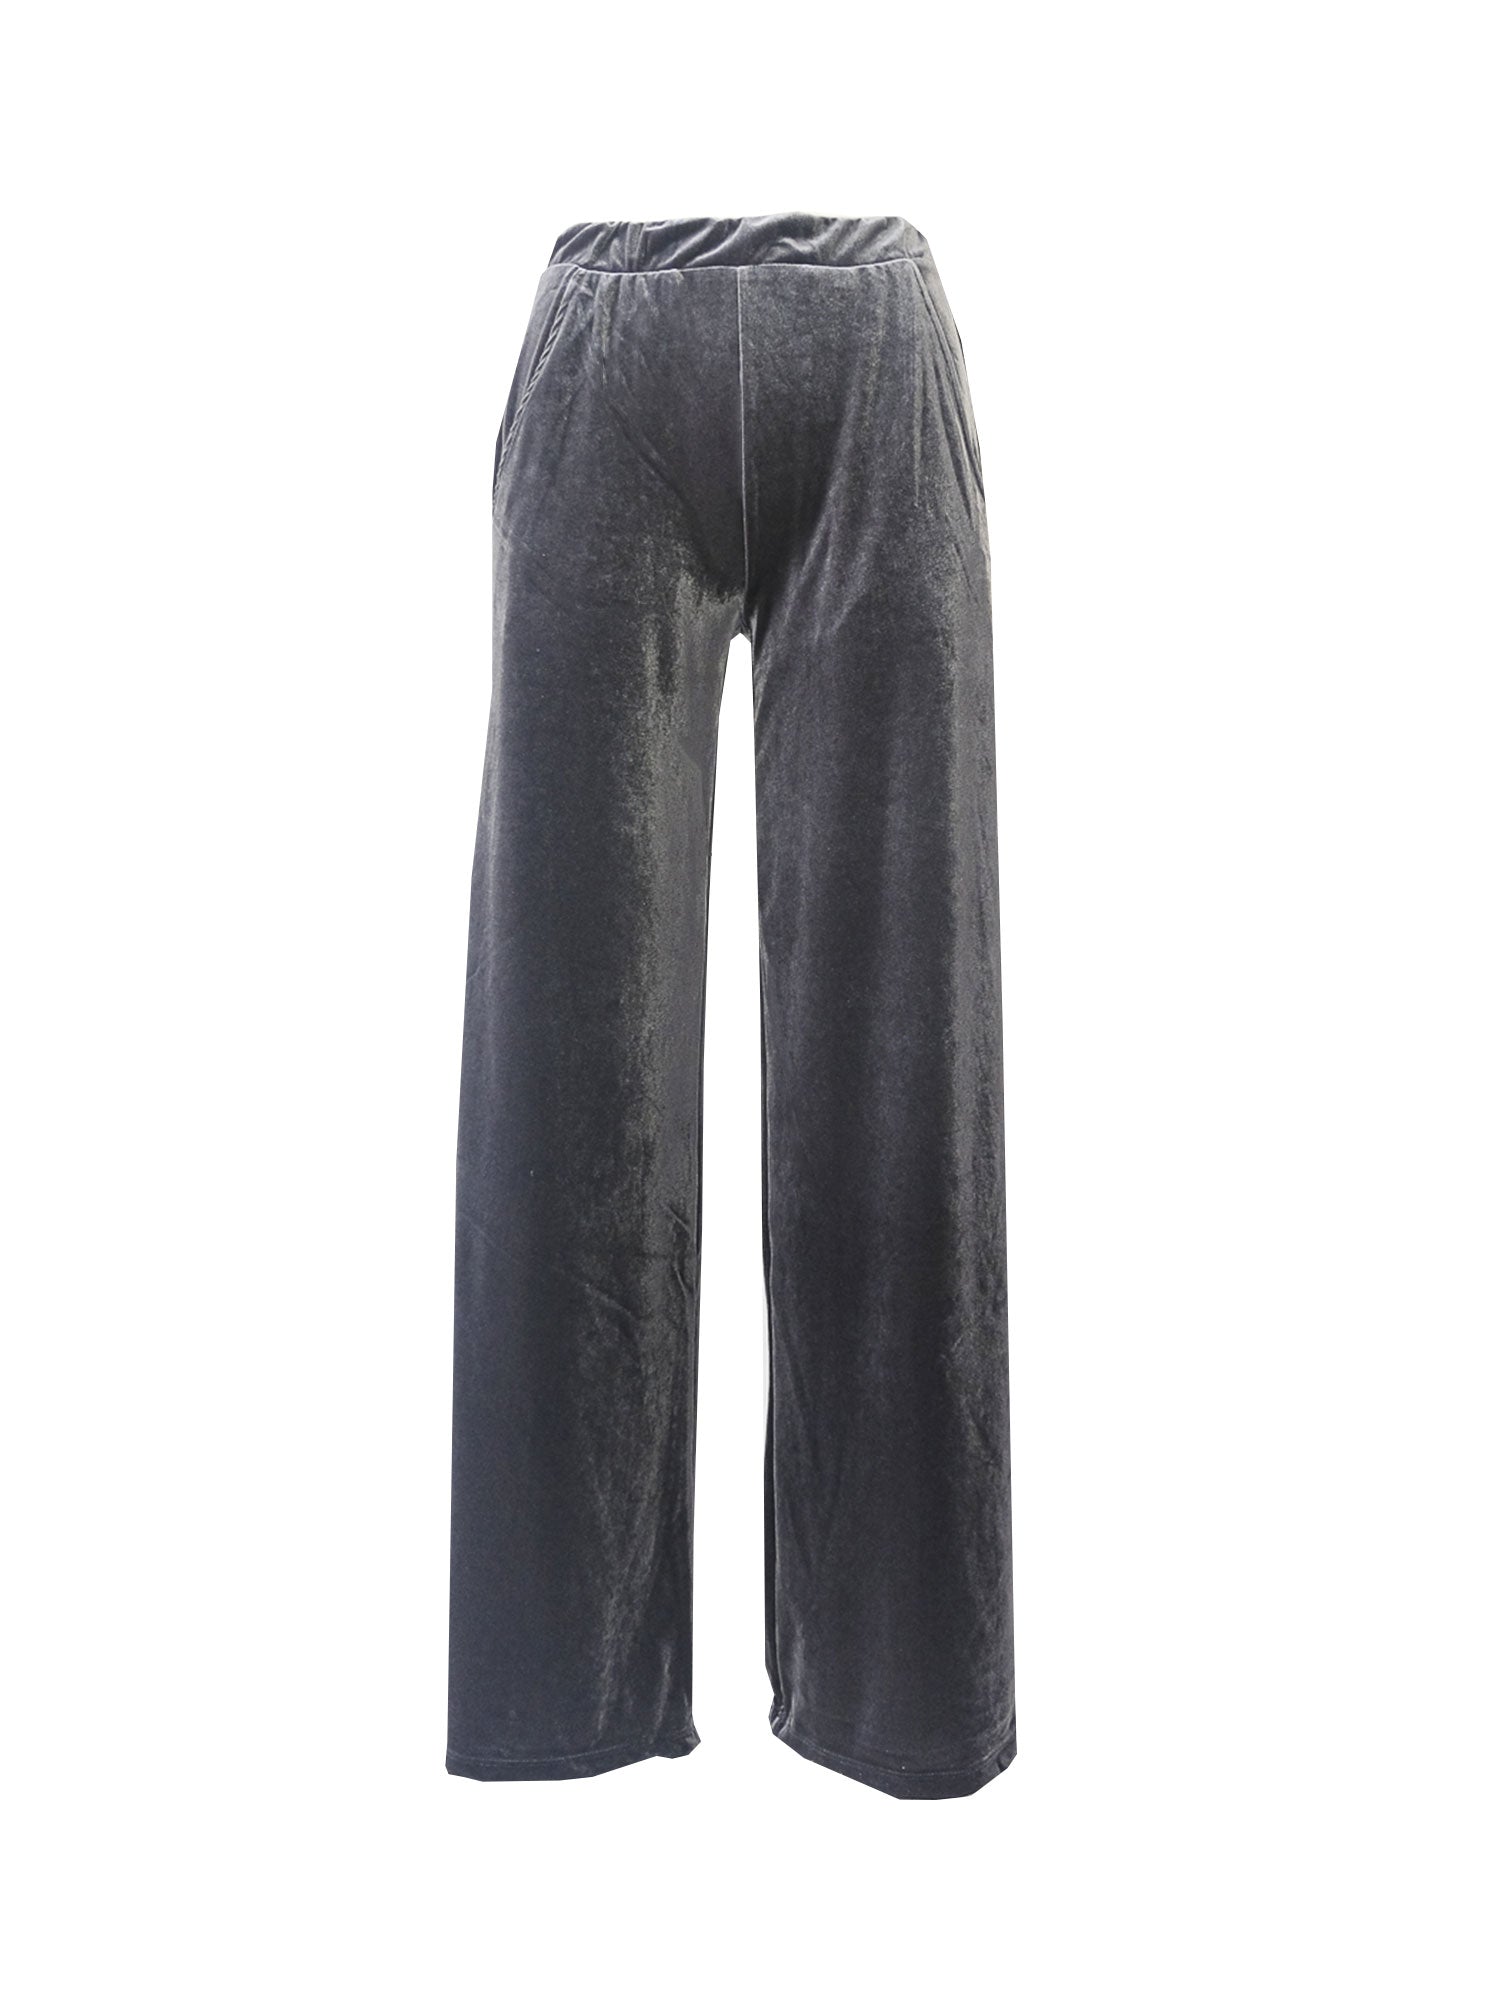 MAXIE - palazzo trousers with side pockets in grey chenille